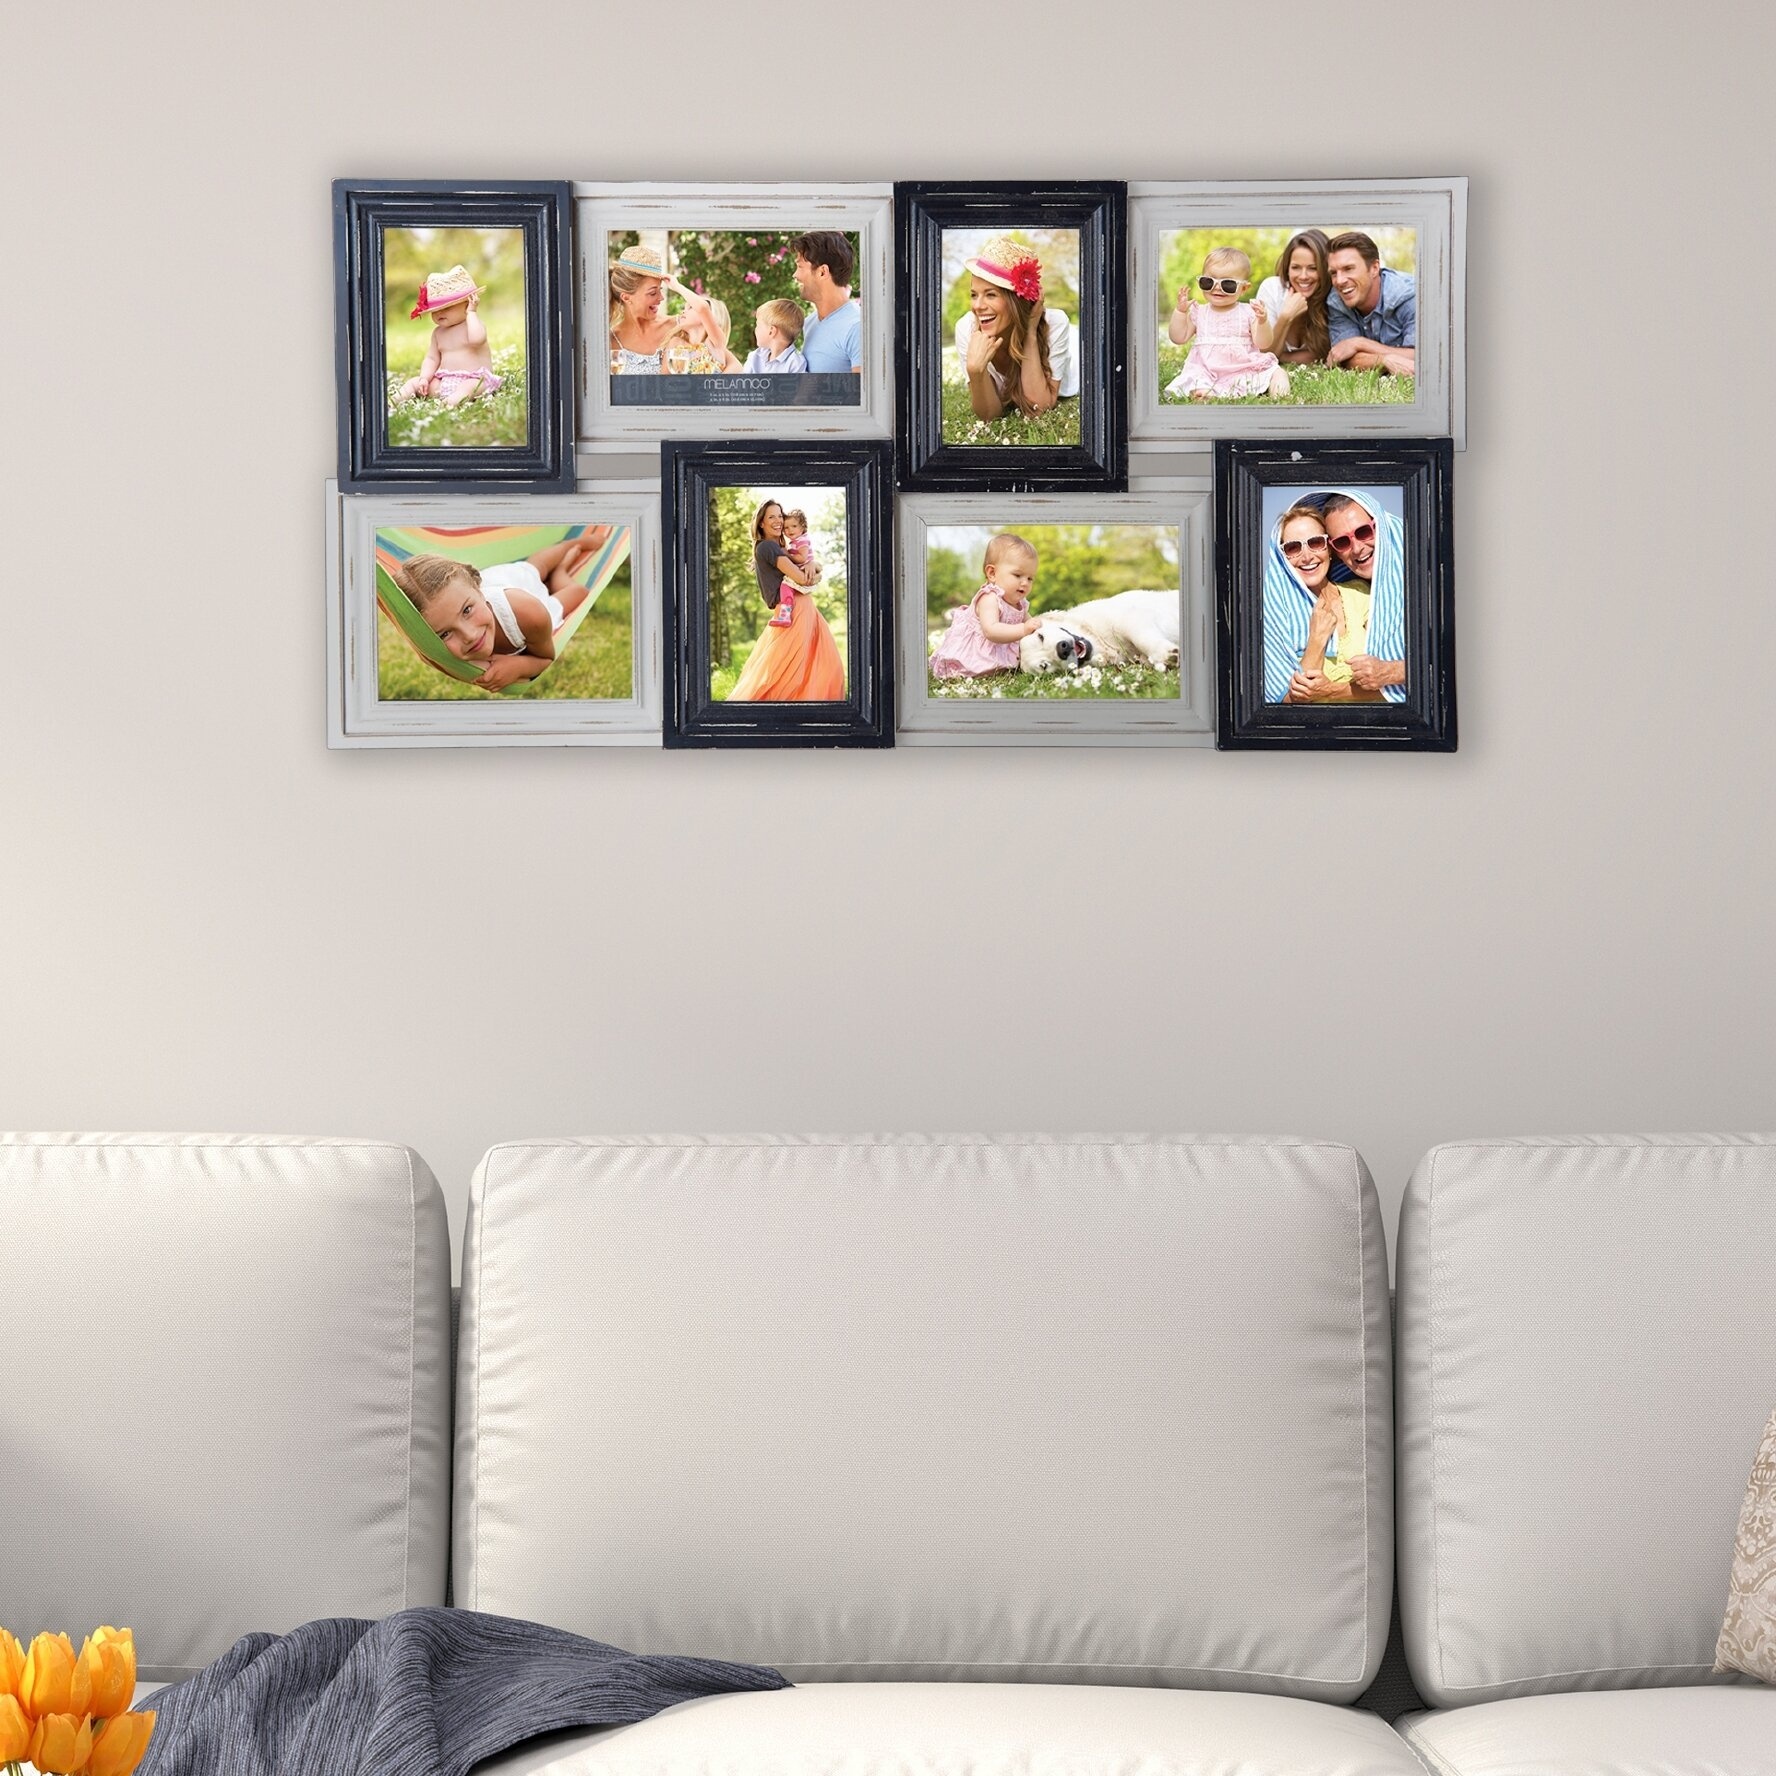 https://visualhunt.com/photos/23/wood-collage-picture-frame.jpg